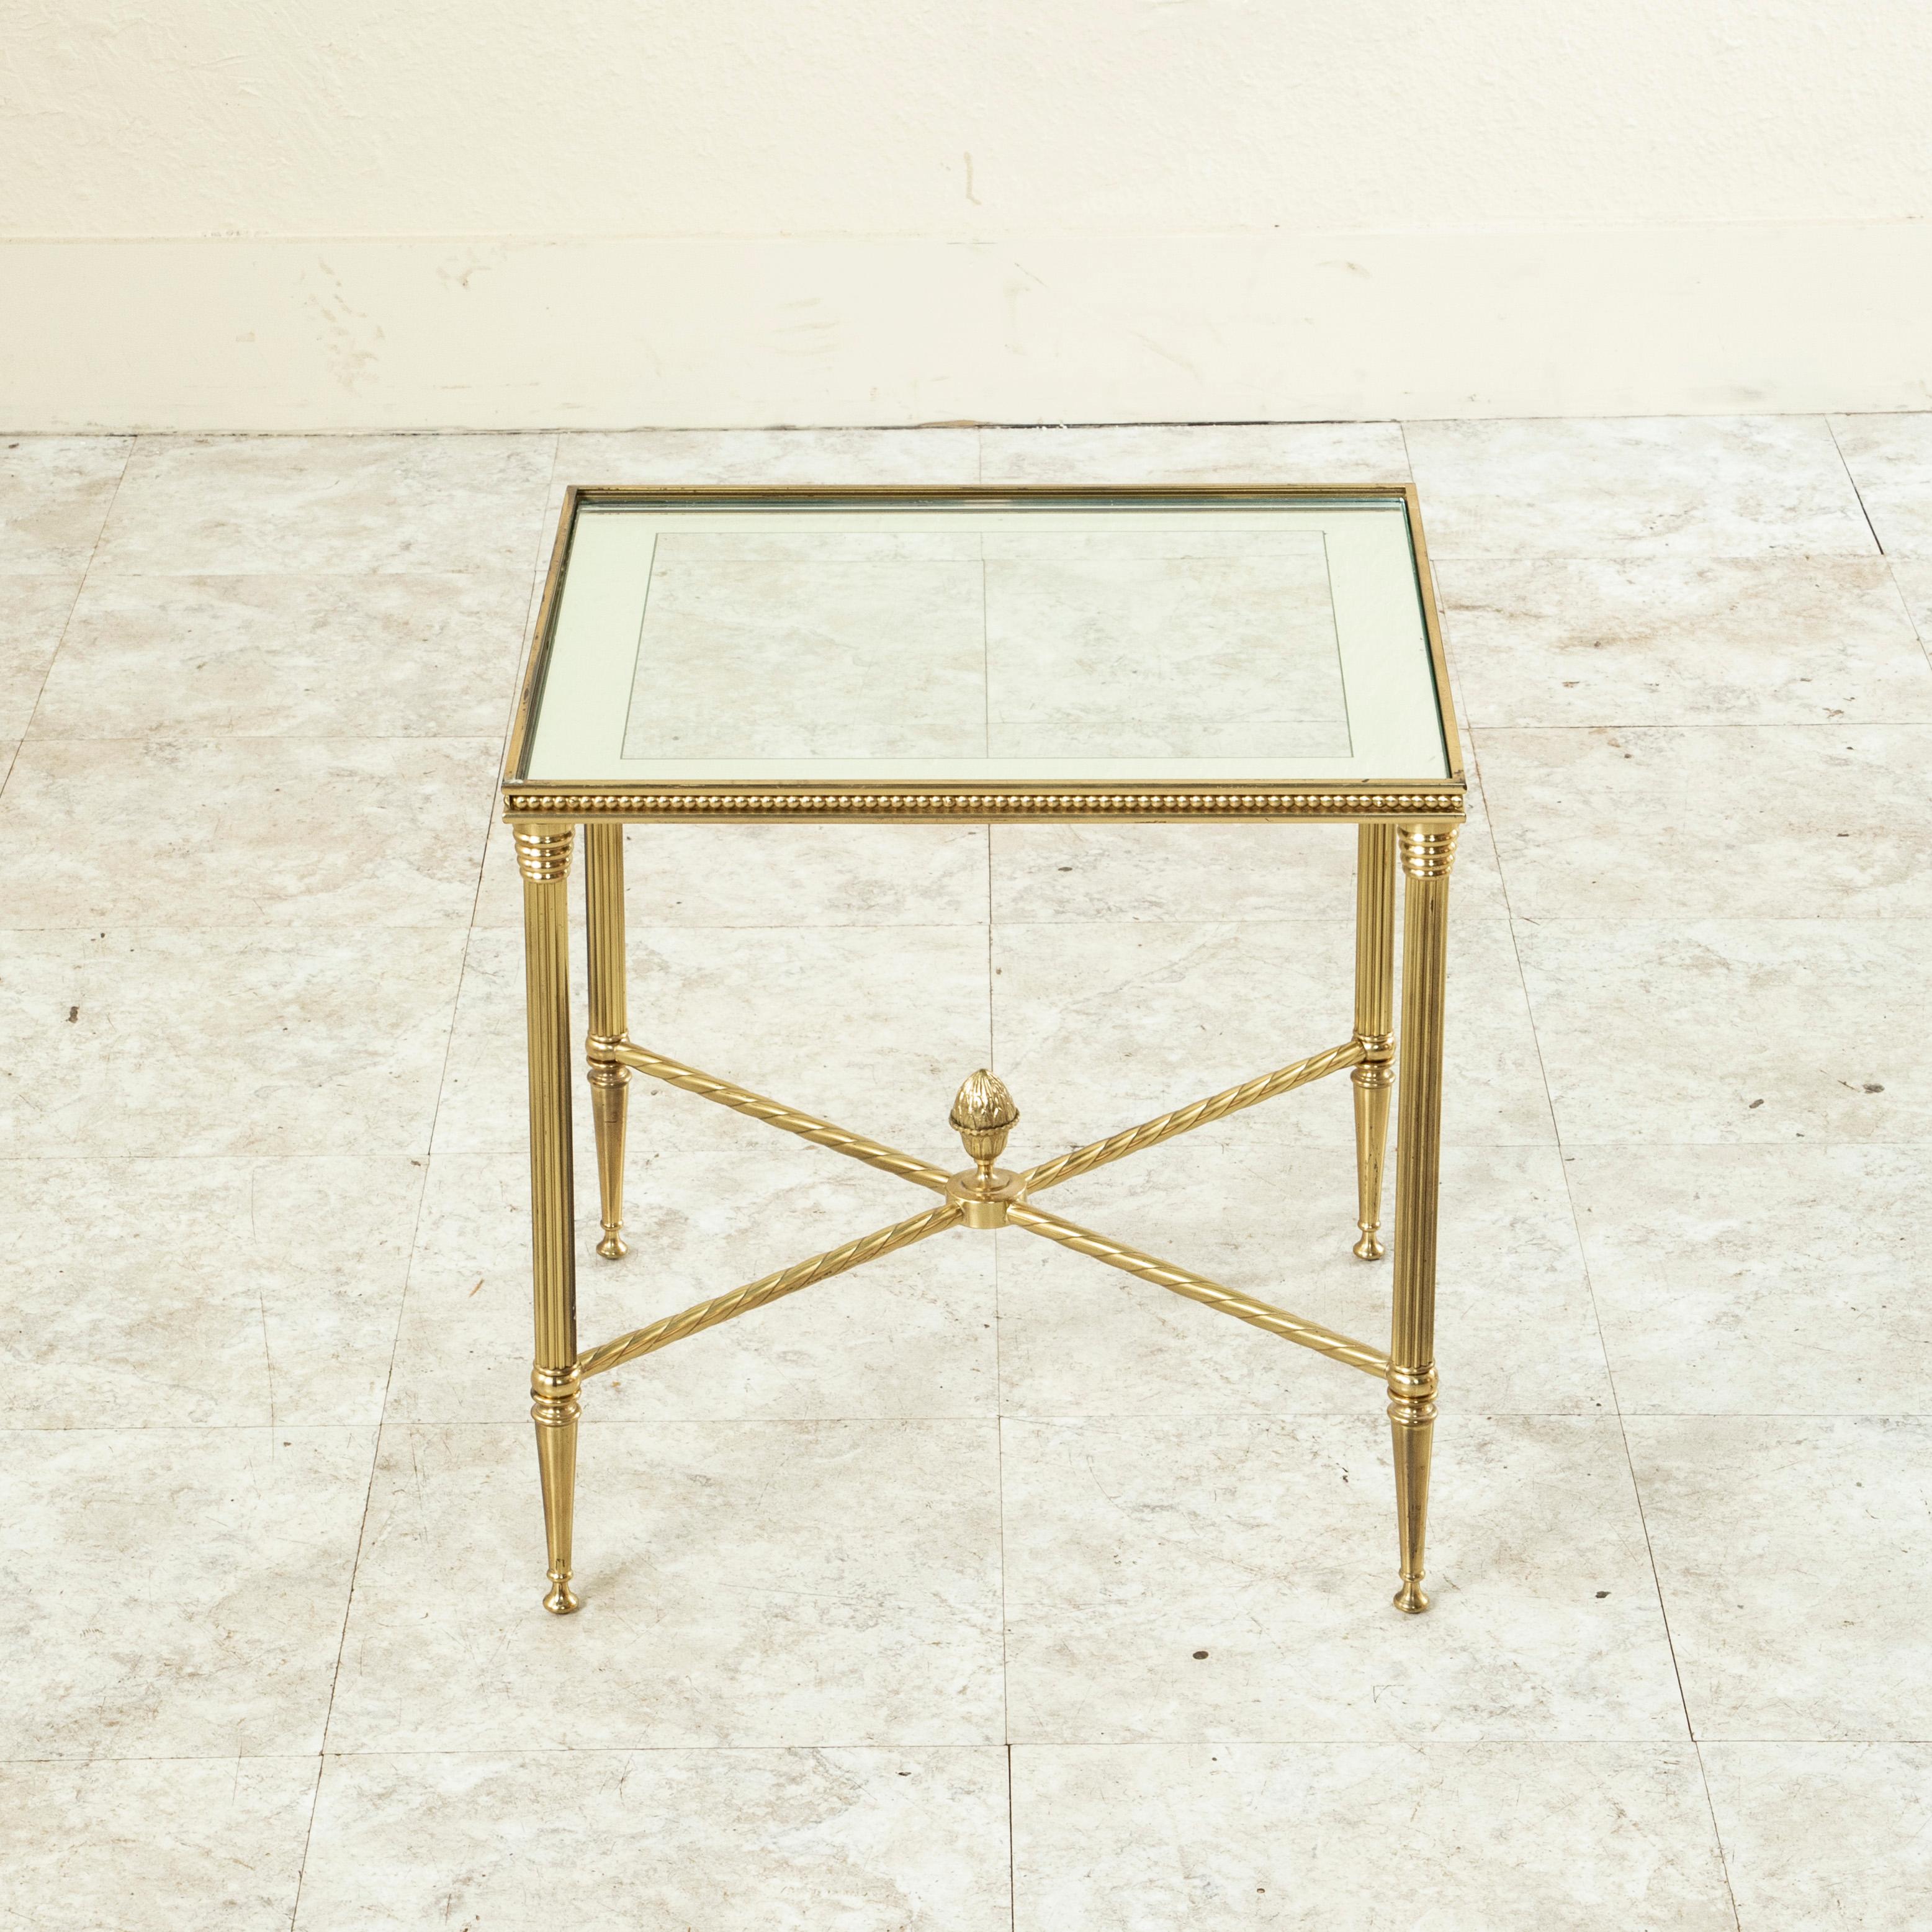 This pair of mid-century Maison Bagues brass side tables features glass tops with mirrored edges. The tables are detailed with fluted legs, beading, and a lower X stretcher with a central Louis XVI acorn finial. c. 1960.